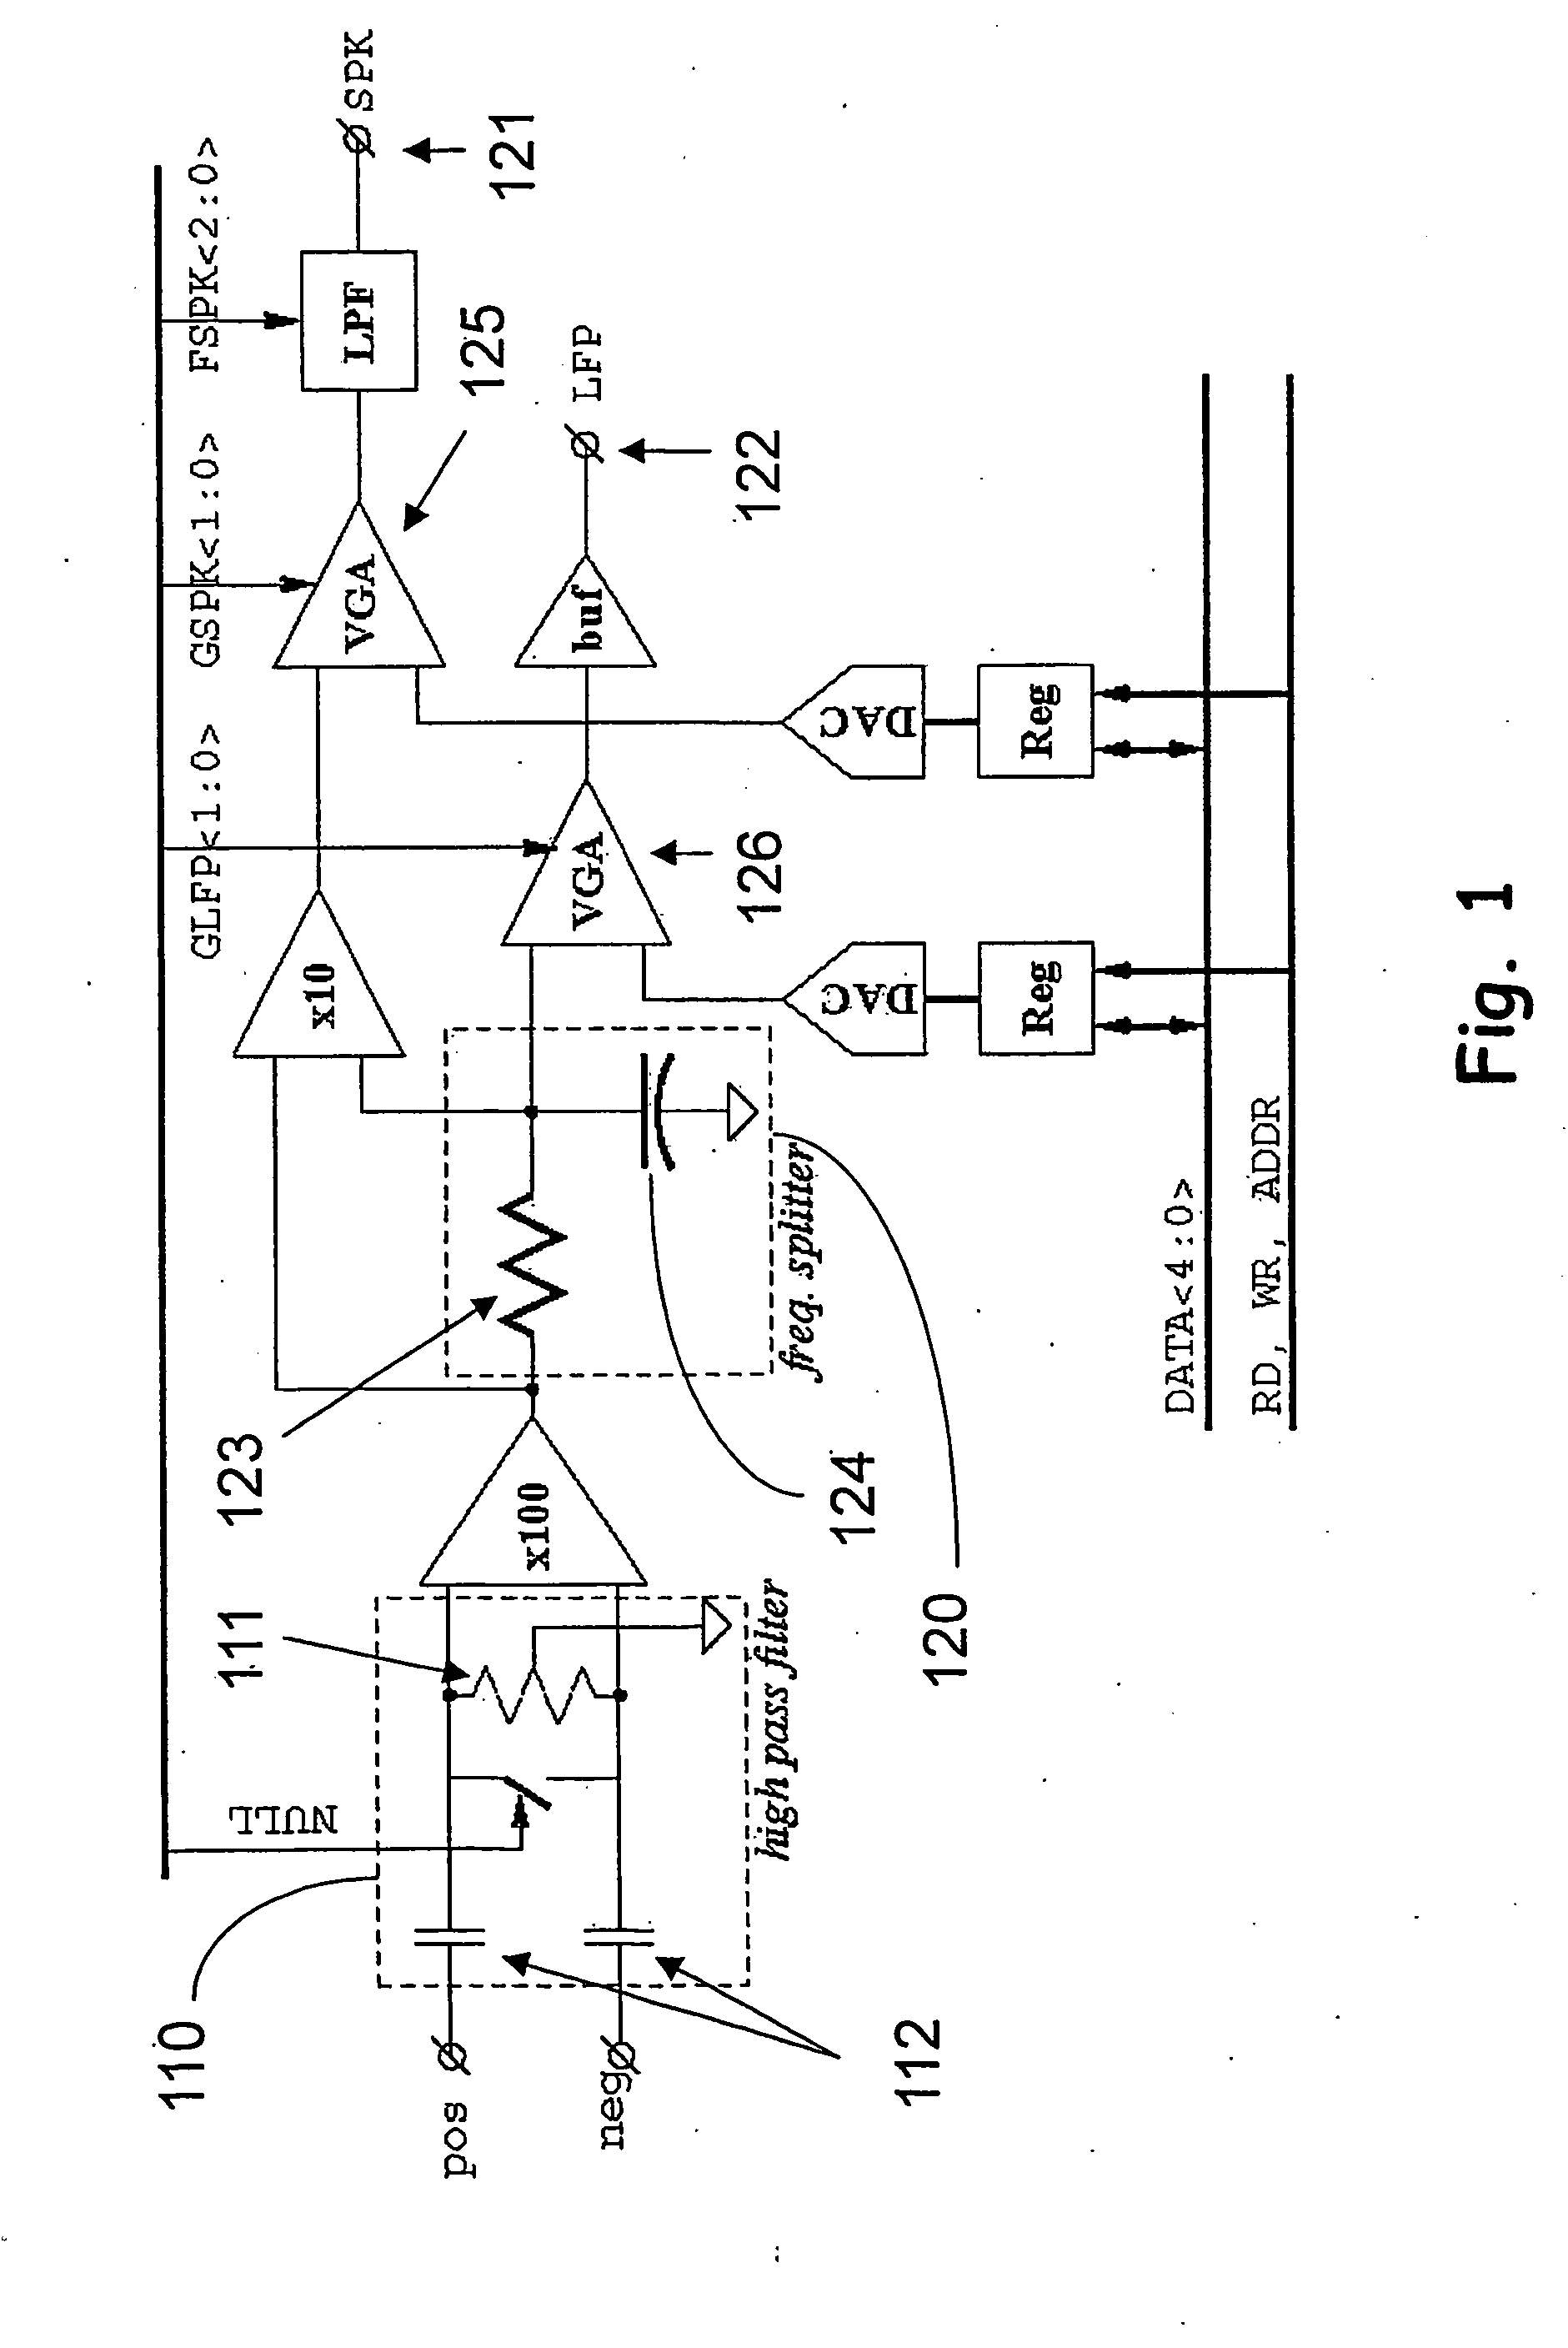 Integrated system and method for multichannel neuronal recording with spike/lfp separation, integrated a/d conversion and threshold detection